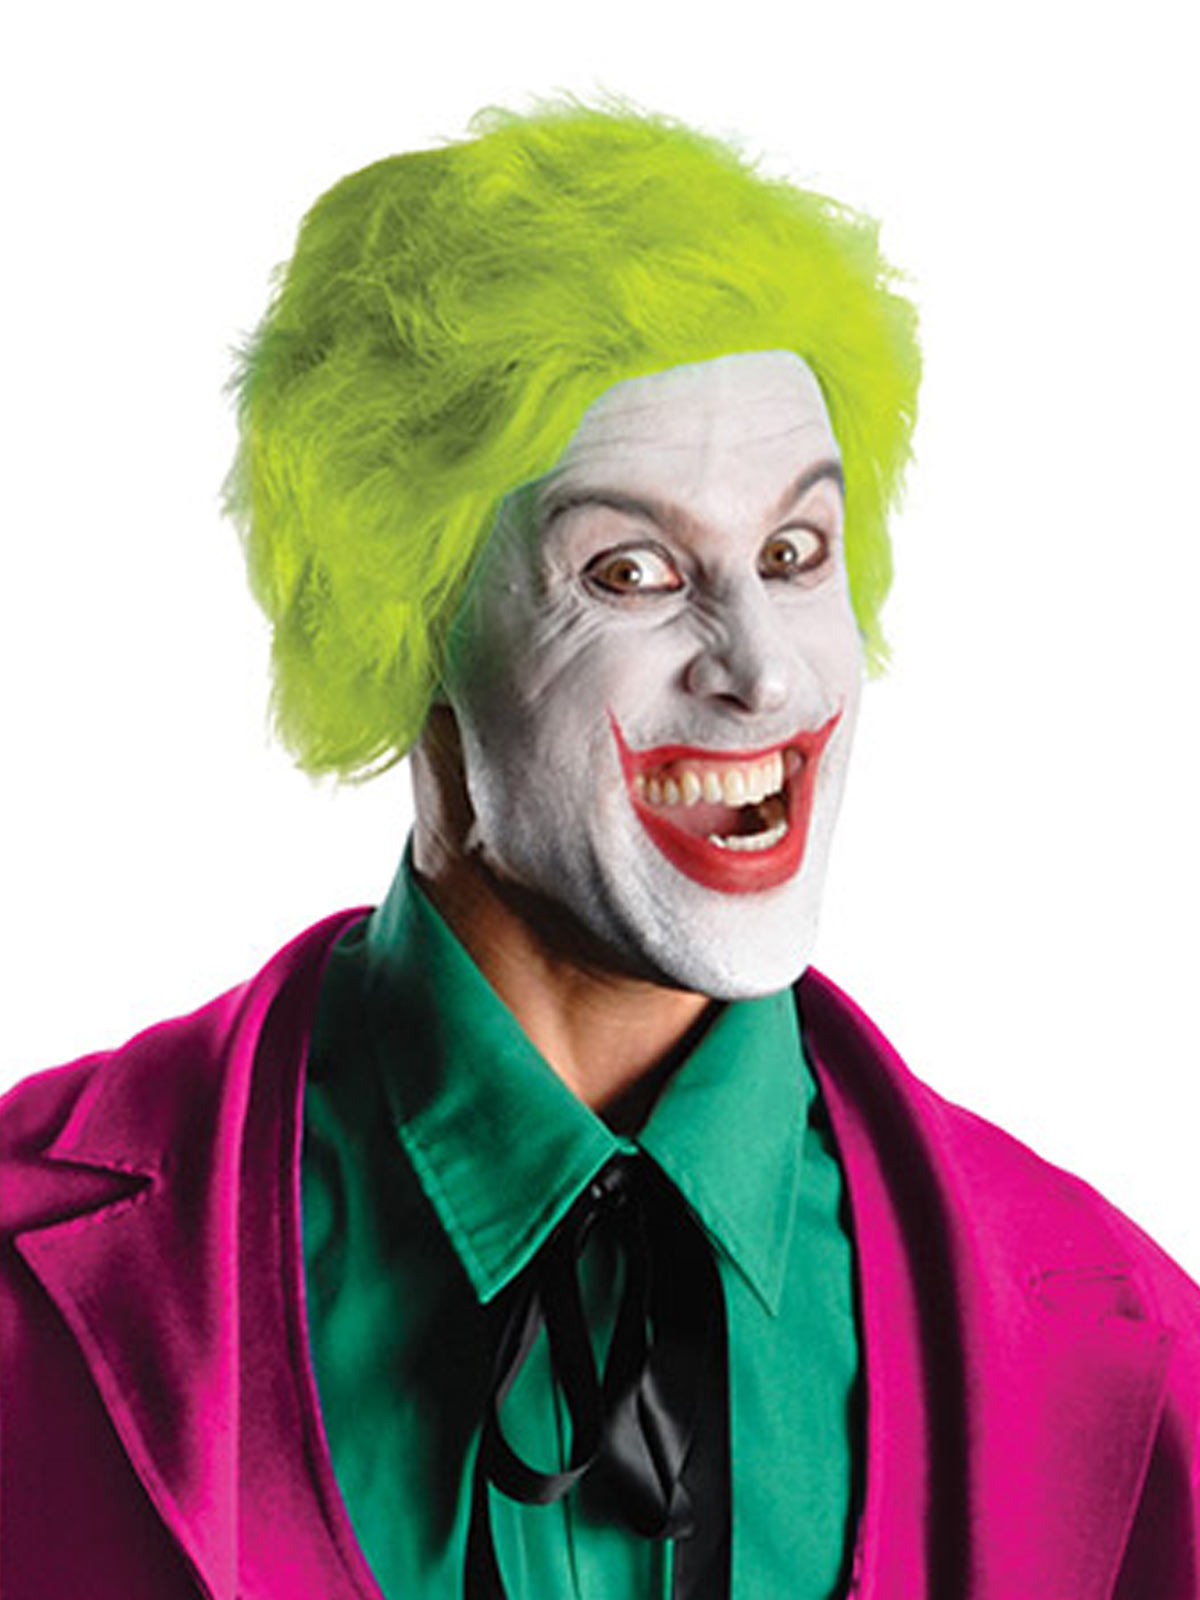 The Joker 1966 Collectors Edition Costume - By Rubie’s DC Comics